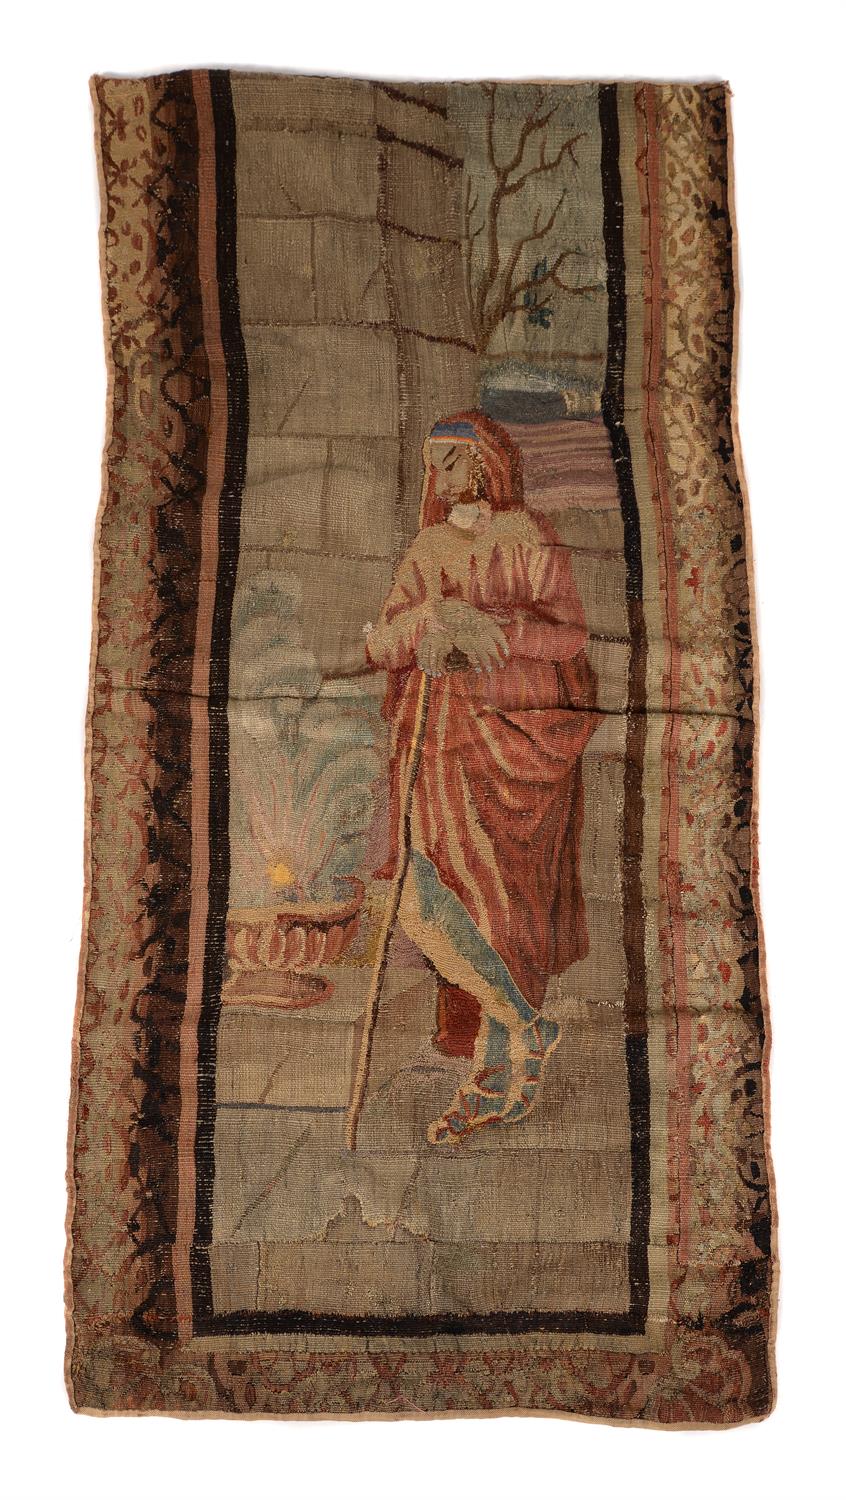 A French or Flemish figural tapestry fragment with an allegory of Winter